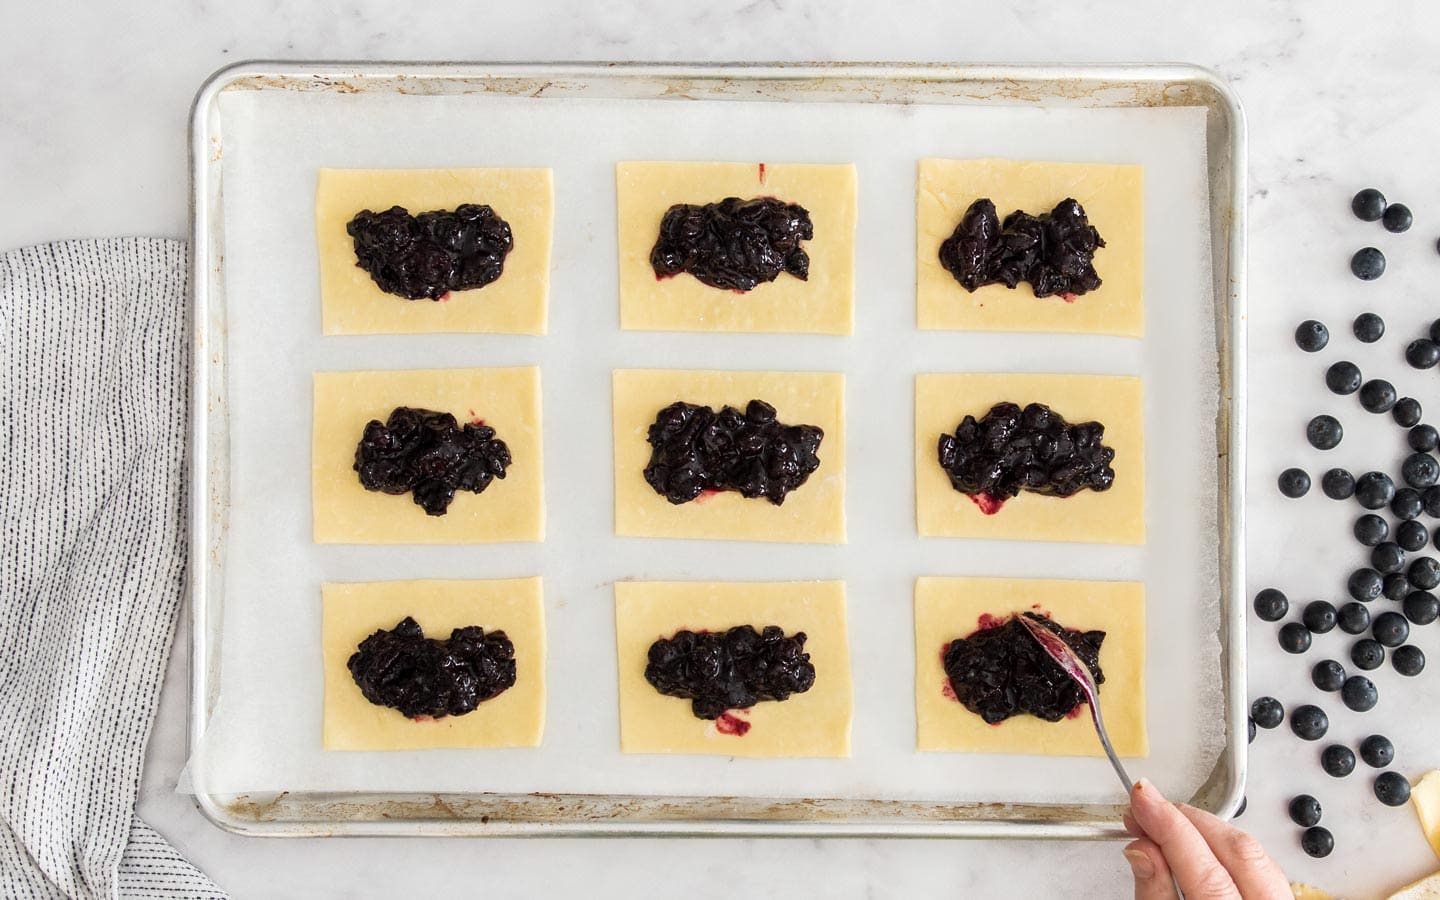 The rectangles of dough topped with blueberry jam.